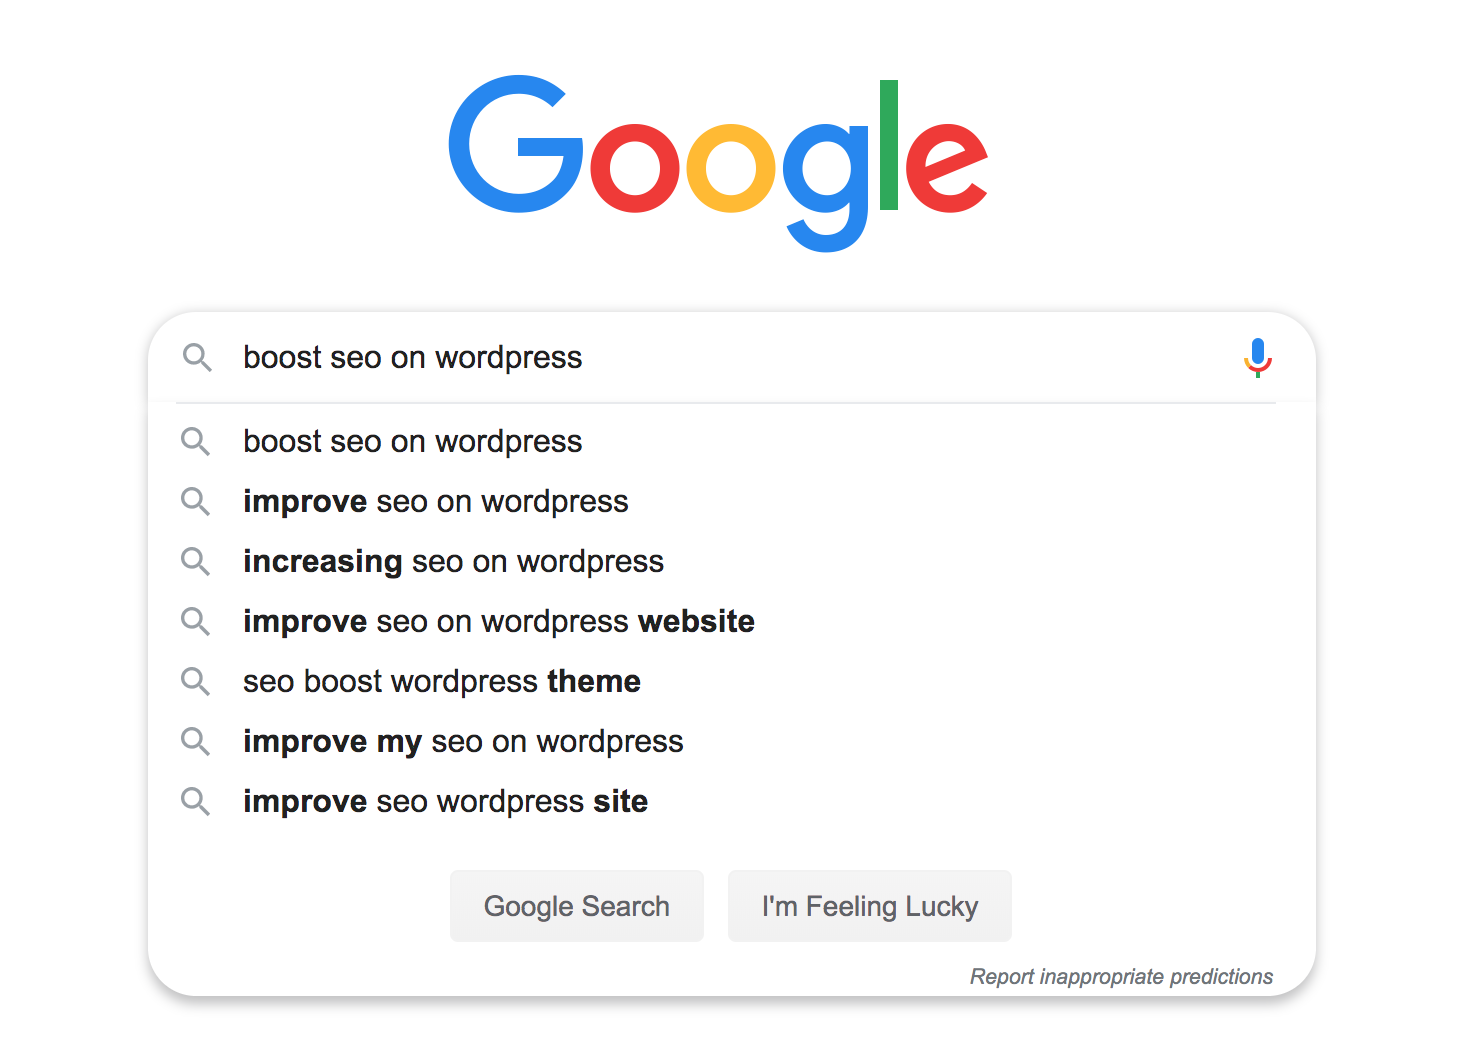 Keywords used in a Google search